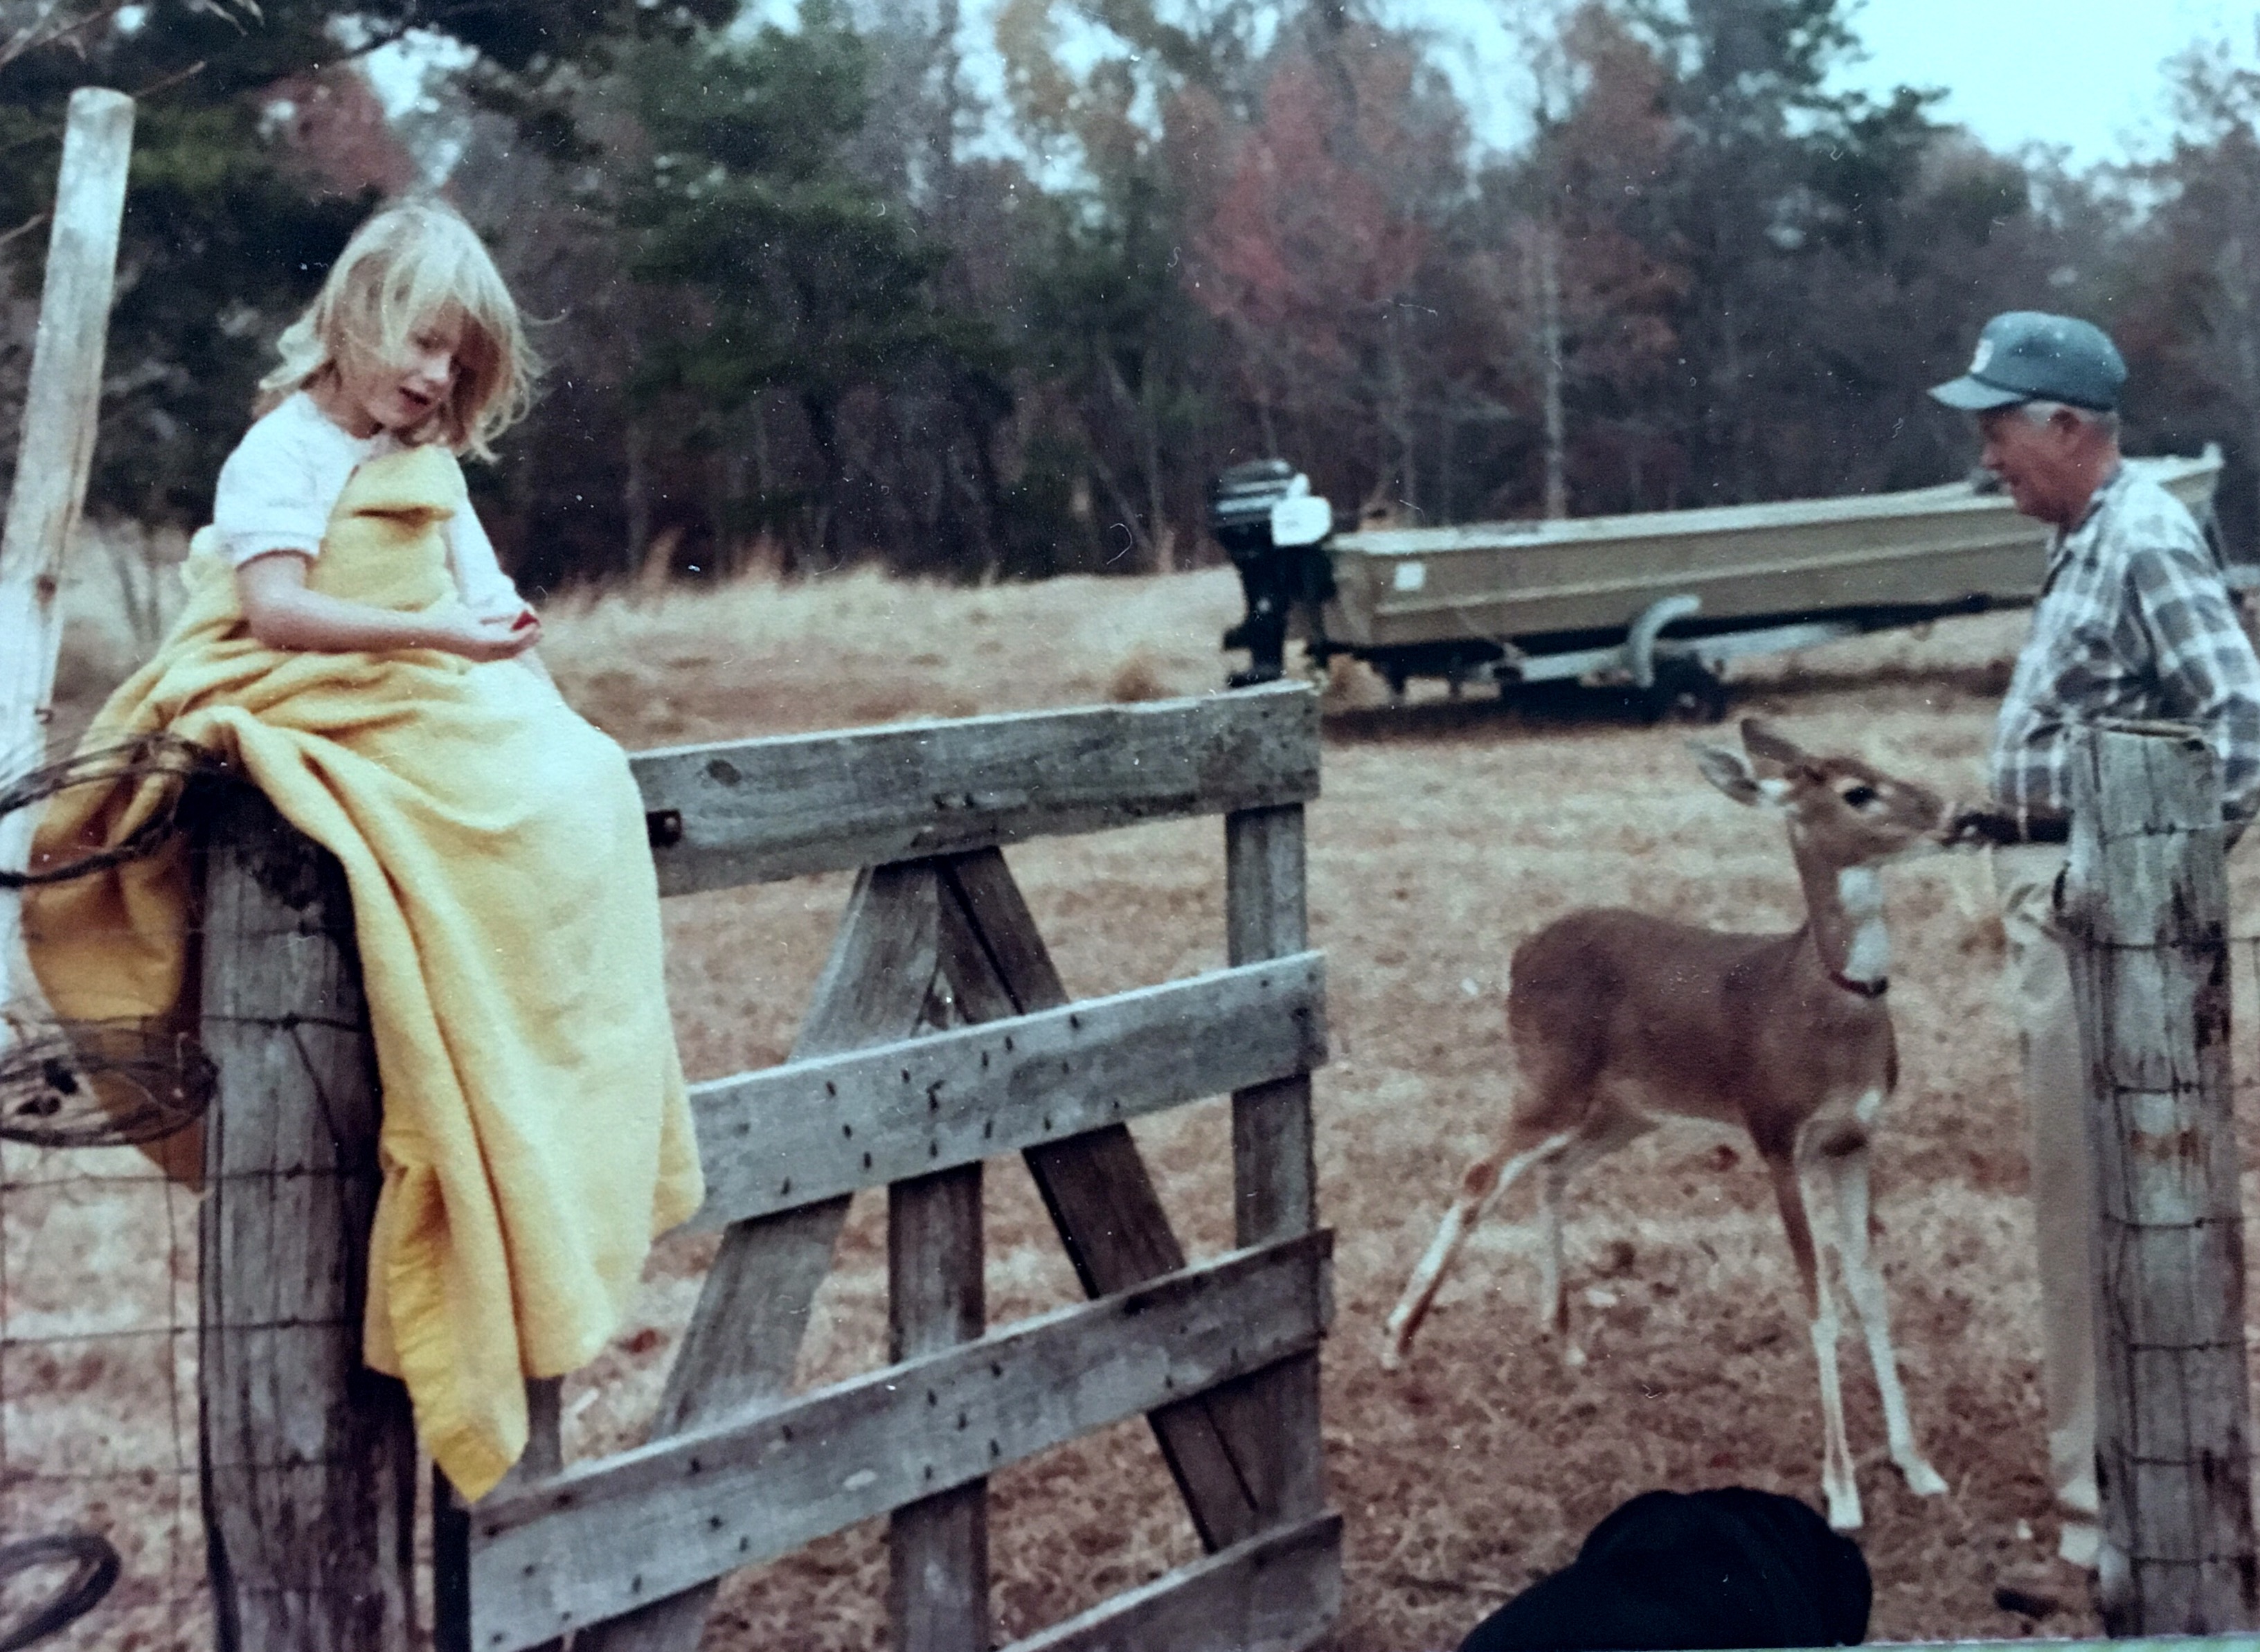 Fall season reminds me of Daddy.  This picture was taken about 1980 with Daddy feeding Bucky while granddaughter, Kelly, is snuggled up on the fence post. This picture says so many things to me, but mostly love.